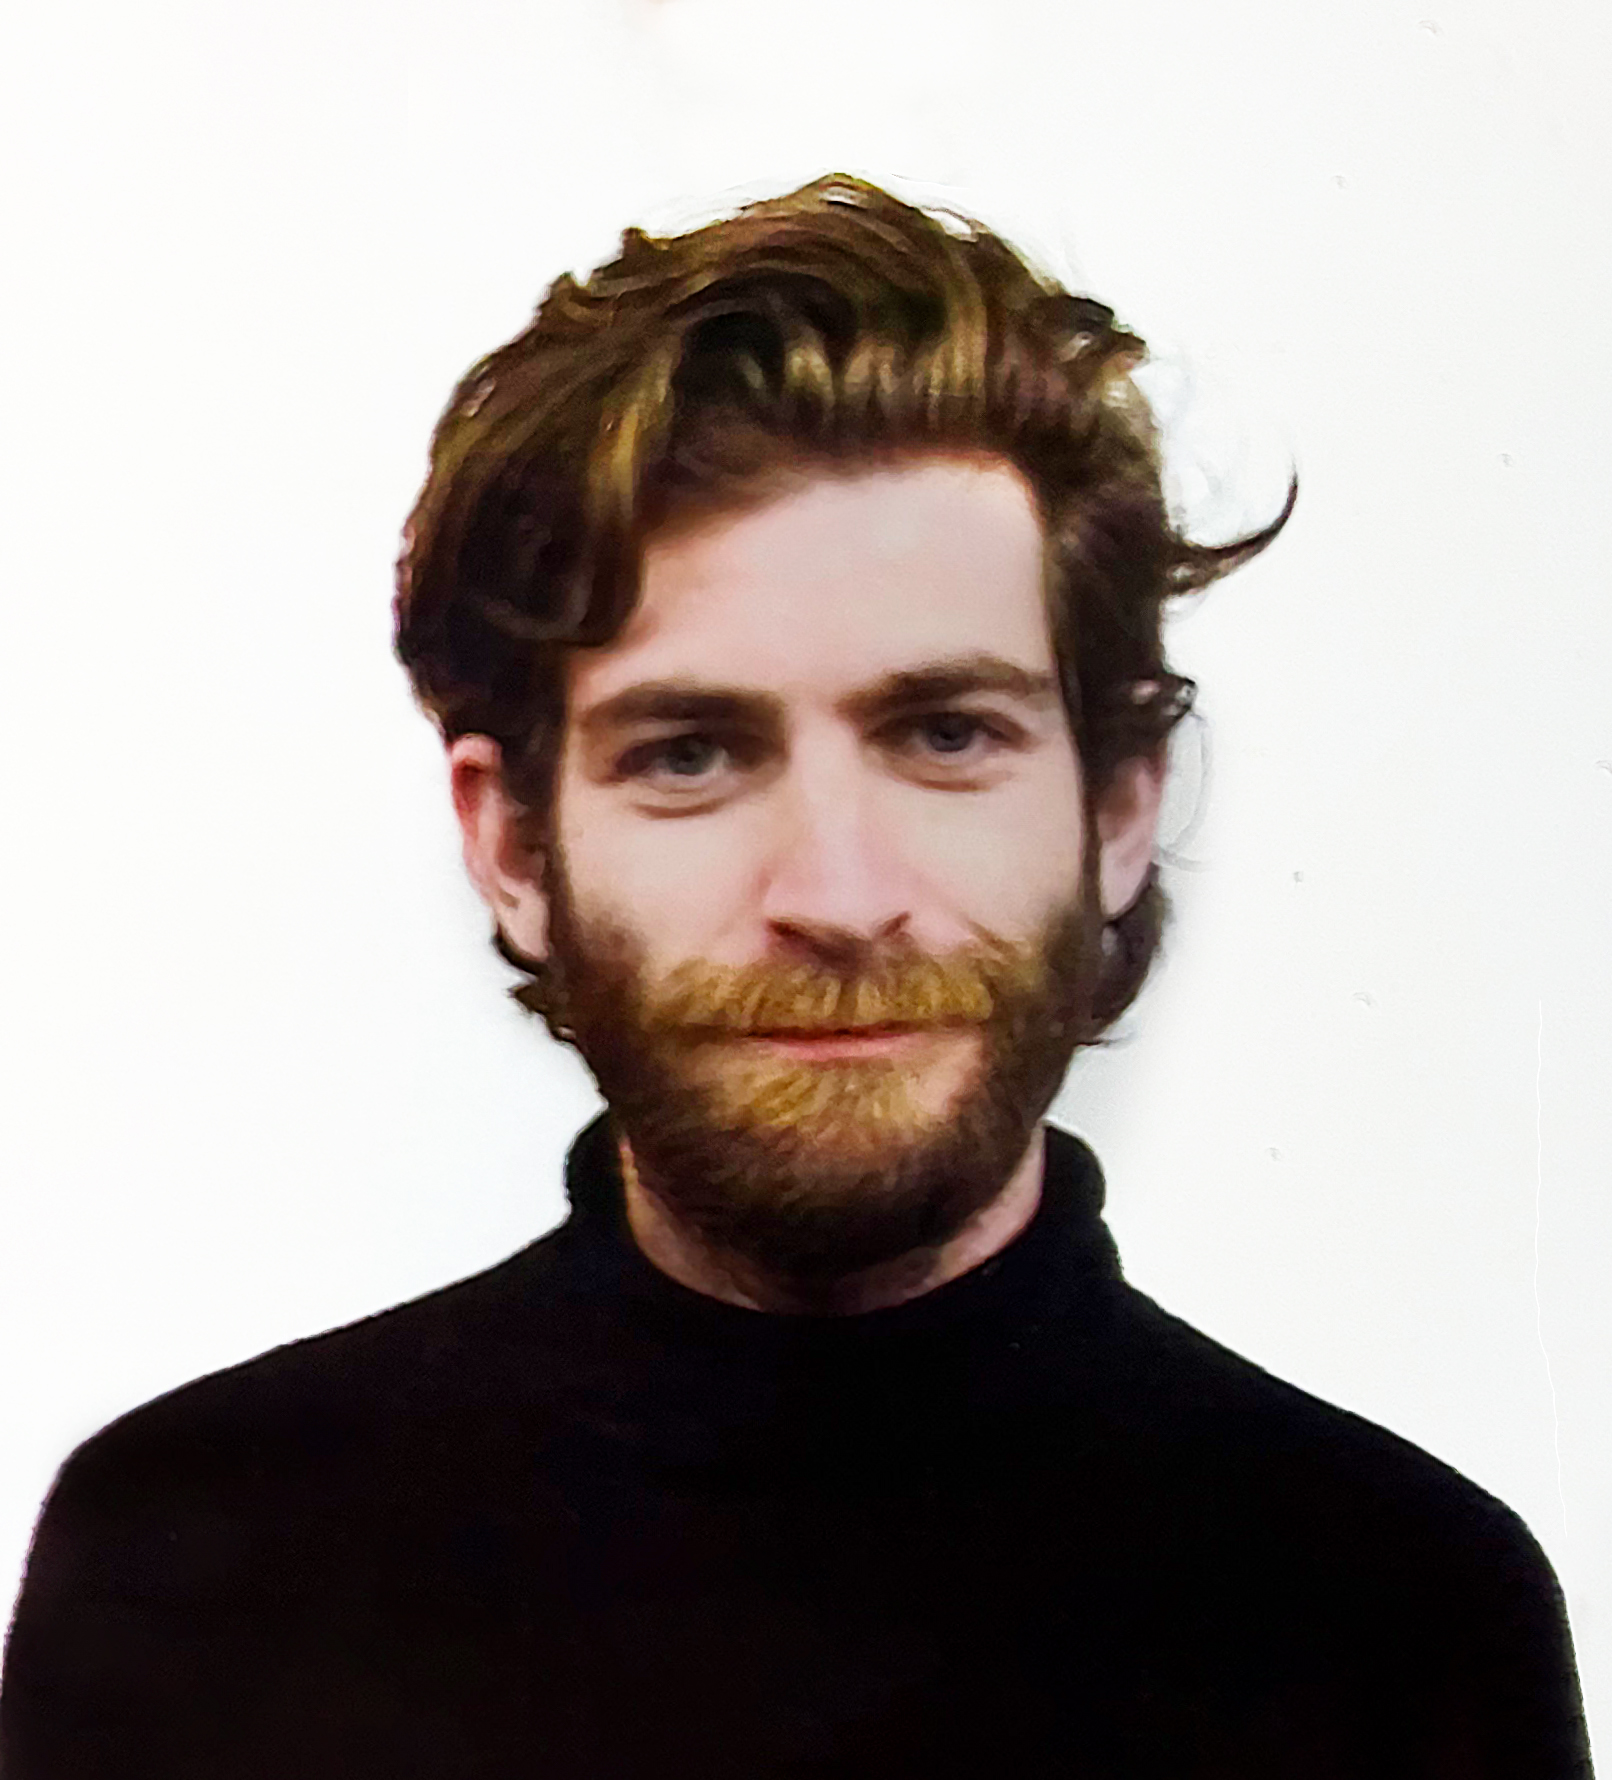 A person with short hair wearing a black turtleneck standing in front of a white background.